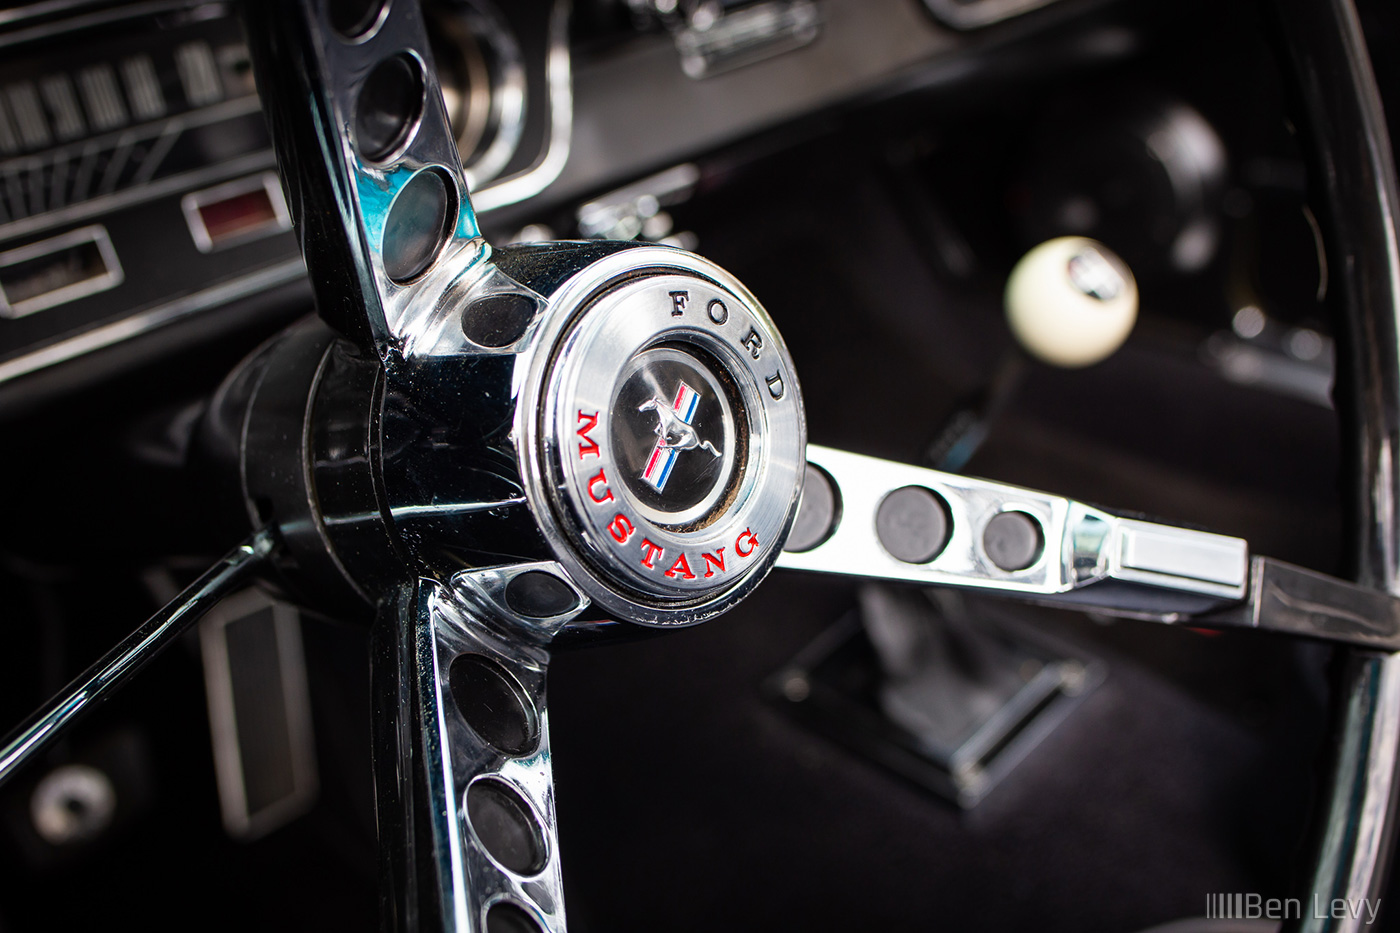 Metal Horn Button on a Classic Ford Mustang